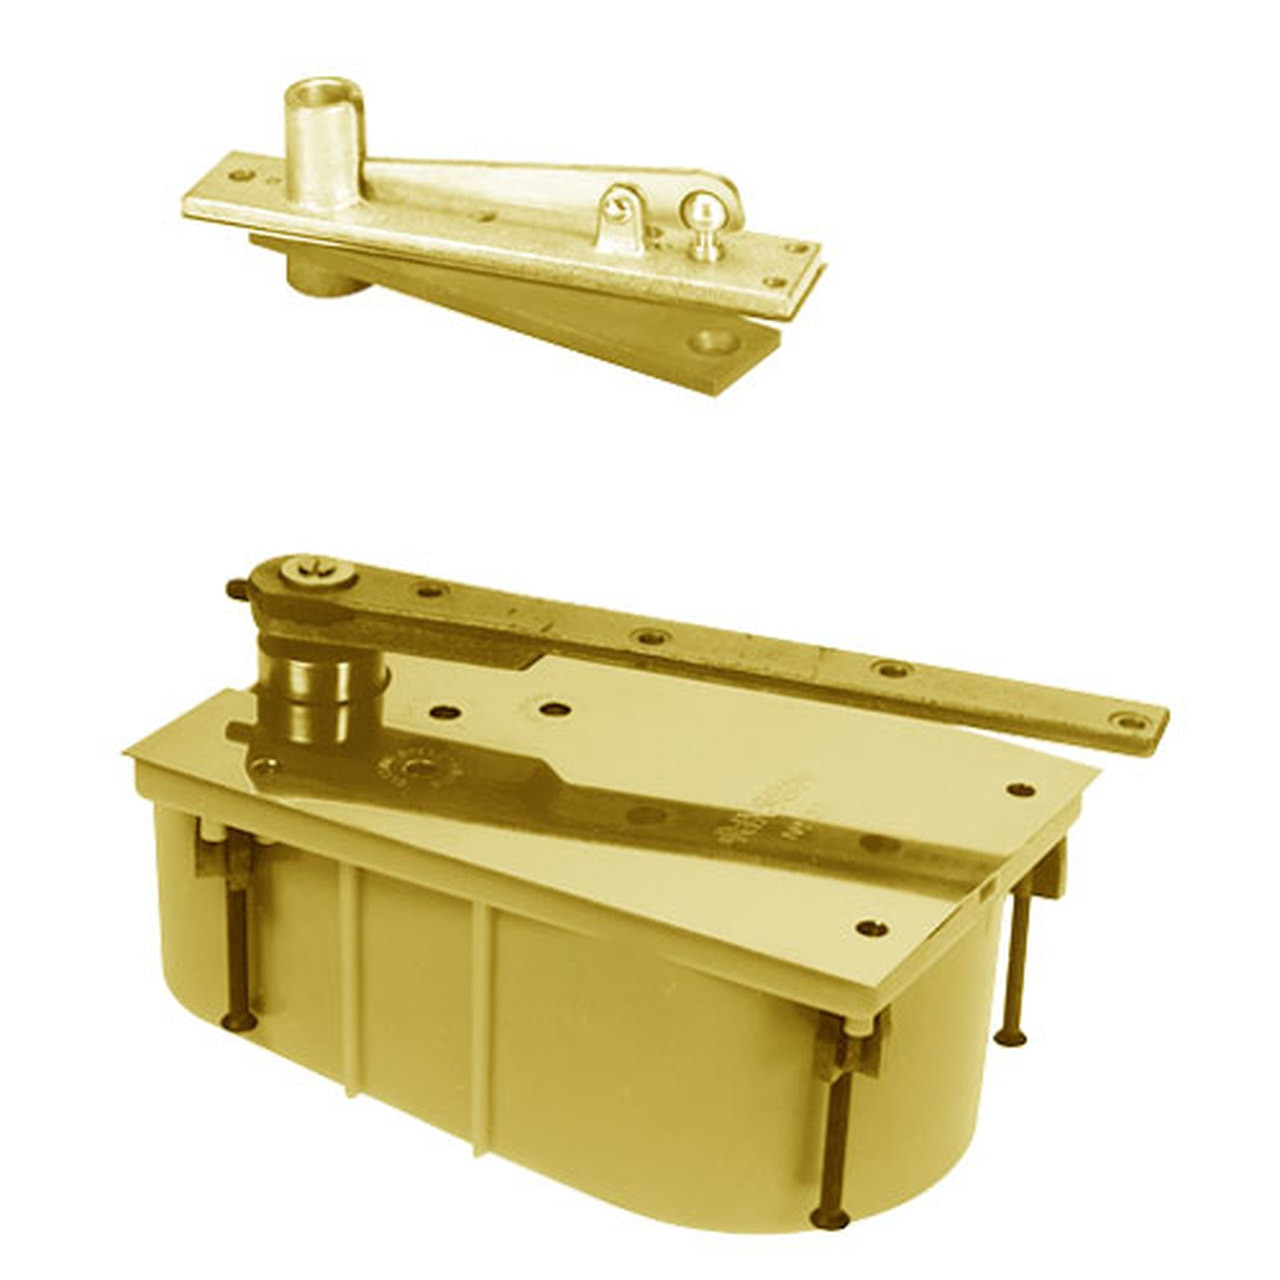 28-95N-554-LFP-LCC-RH-605 Rixson 28 Series Heavy Duty Single Acting Center Hung Floor Closer with Concealed Arm in Bright Brass Finish